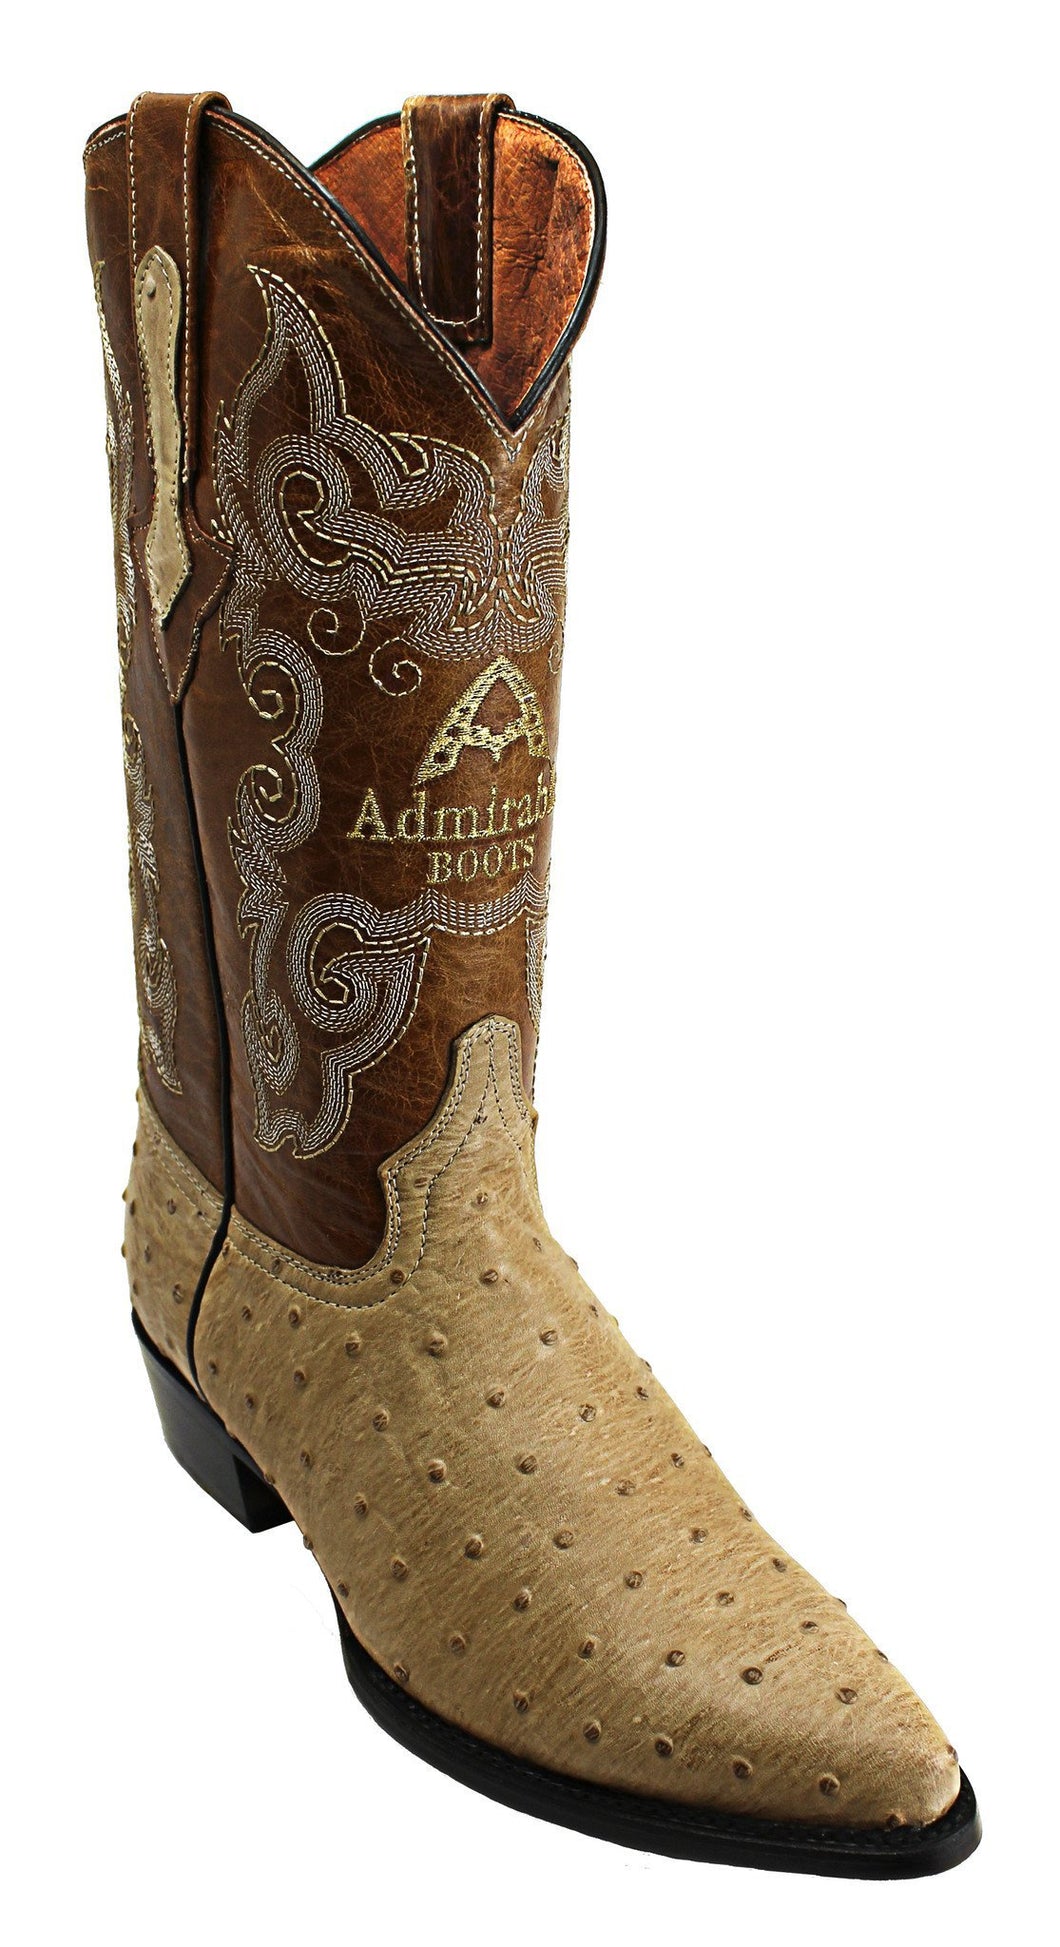 Admirable® Ostrich Print Leather J Toe Boots (Beige)